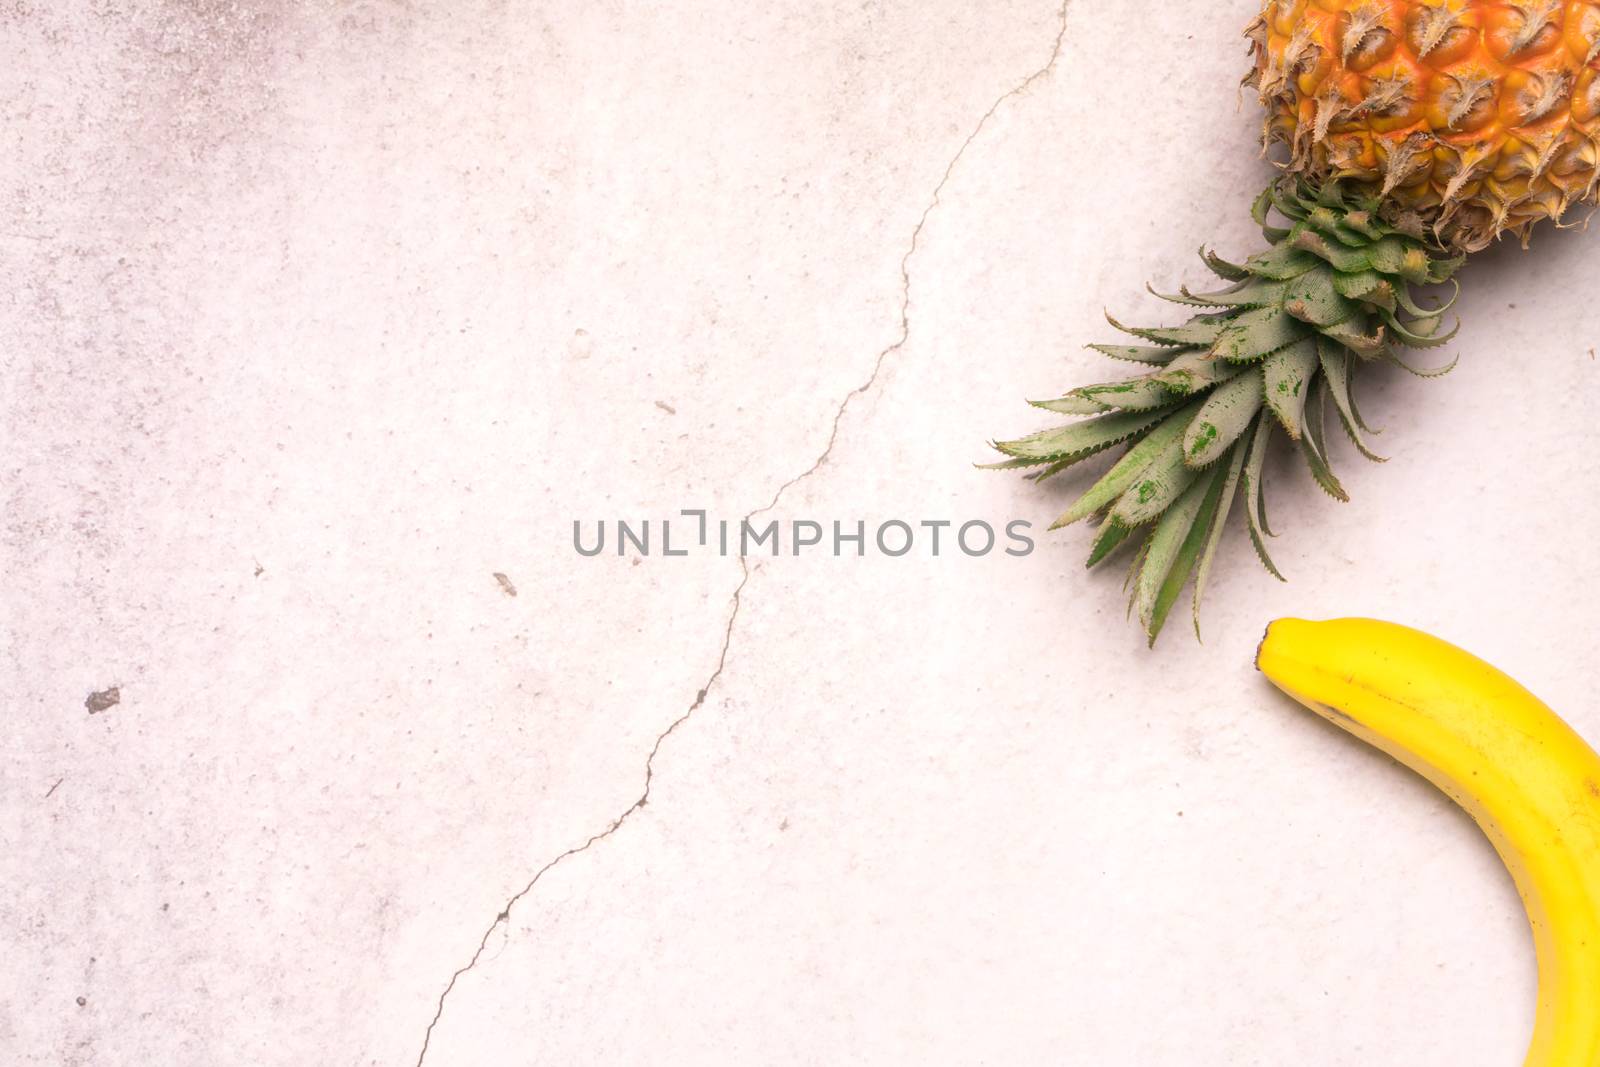 Tropical and Seasonal Summer Fruits. Pineapple and Bananas Arranged in corner of backgrounds, Healthy Lifestyle. Flat Lay